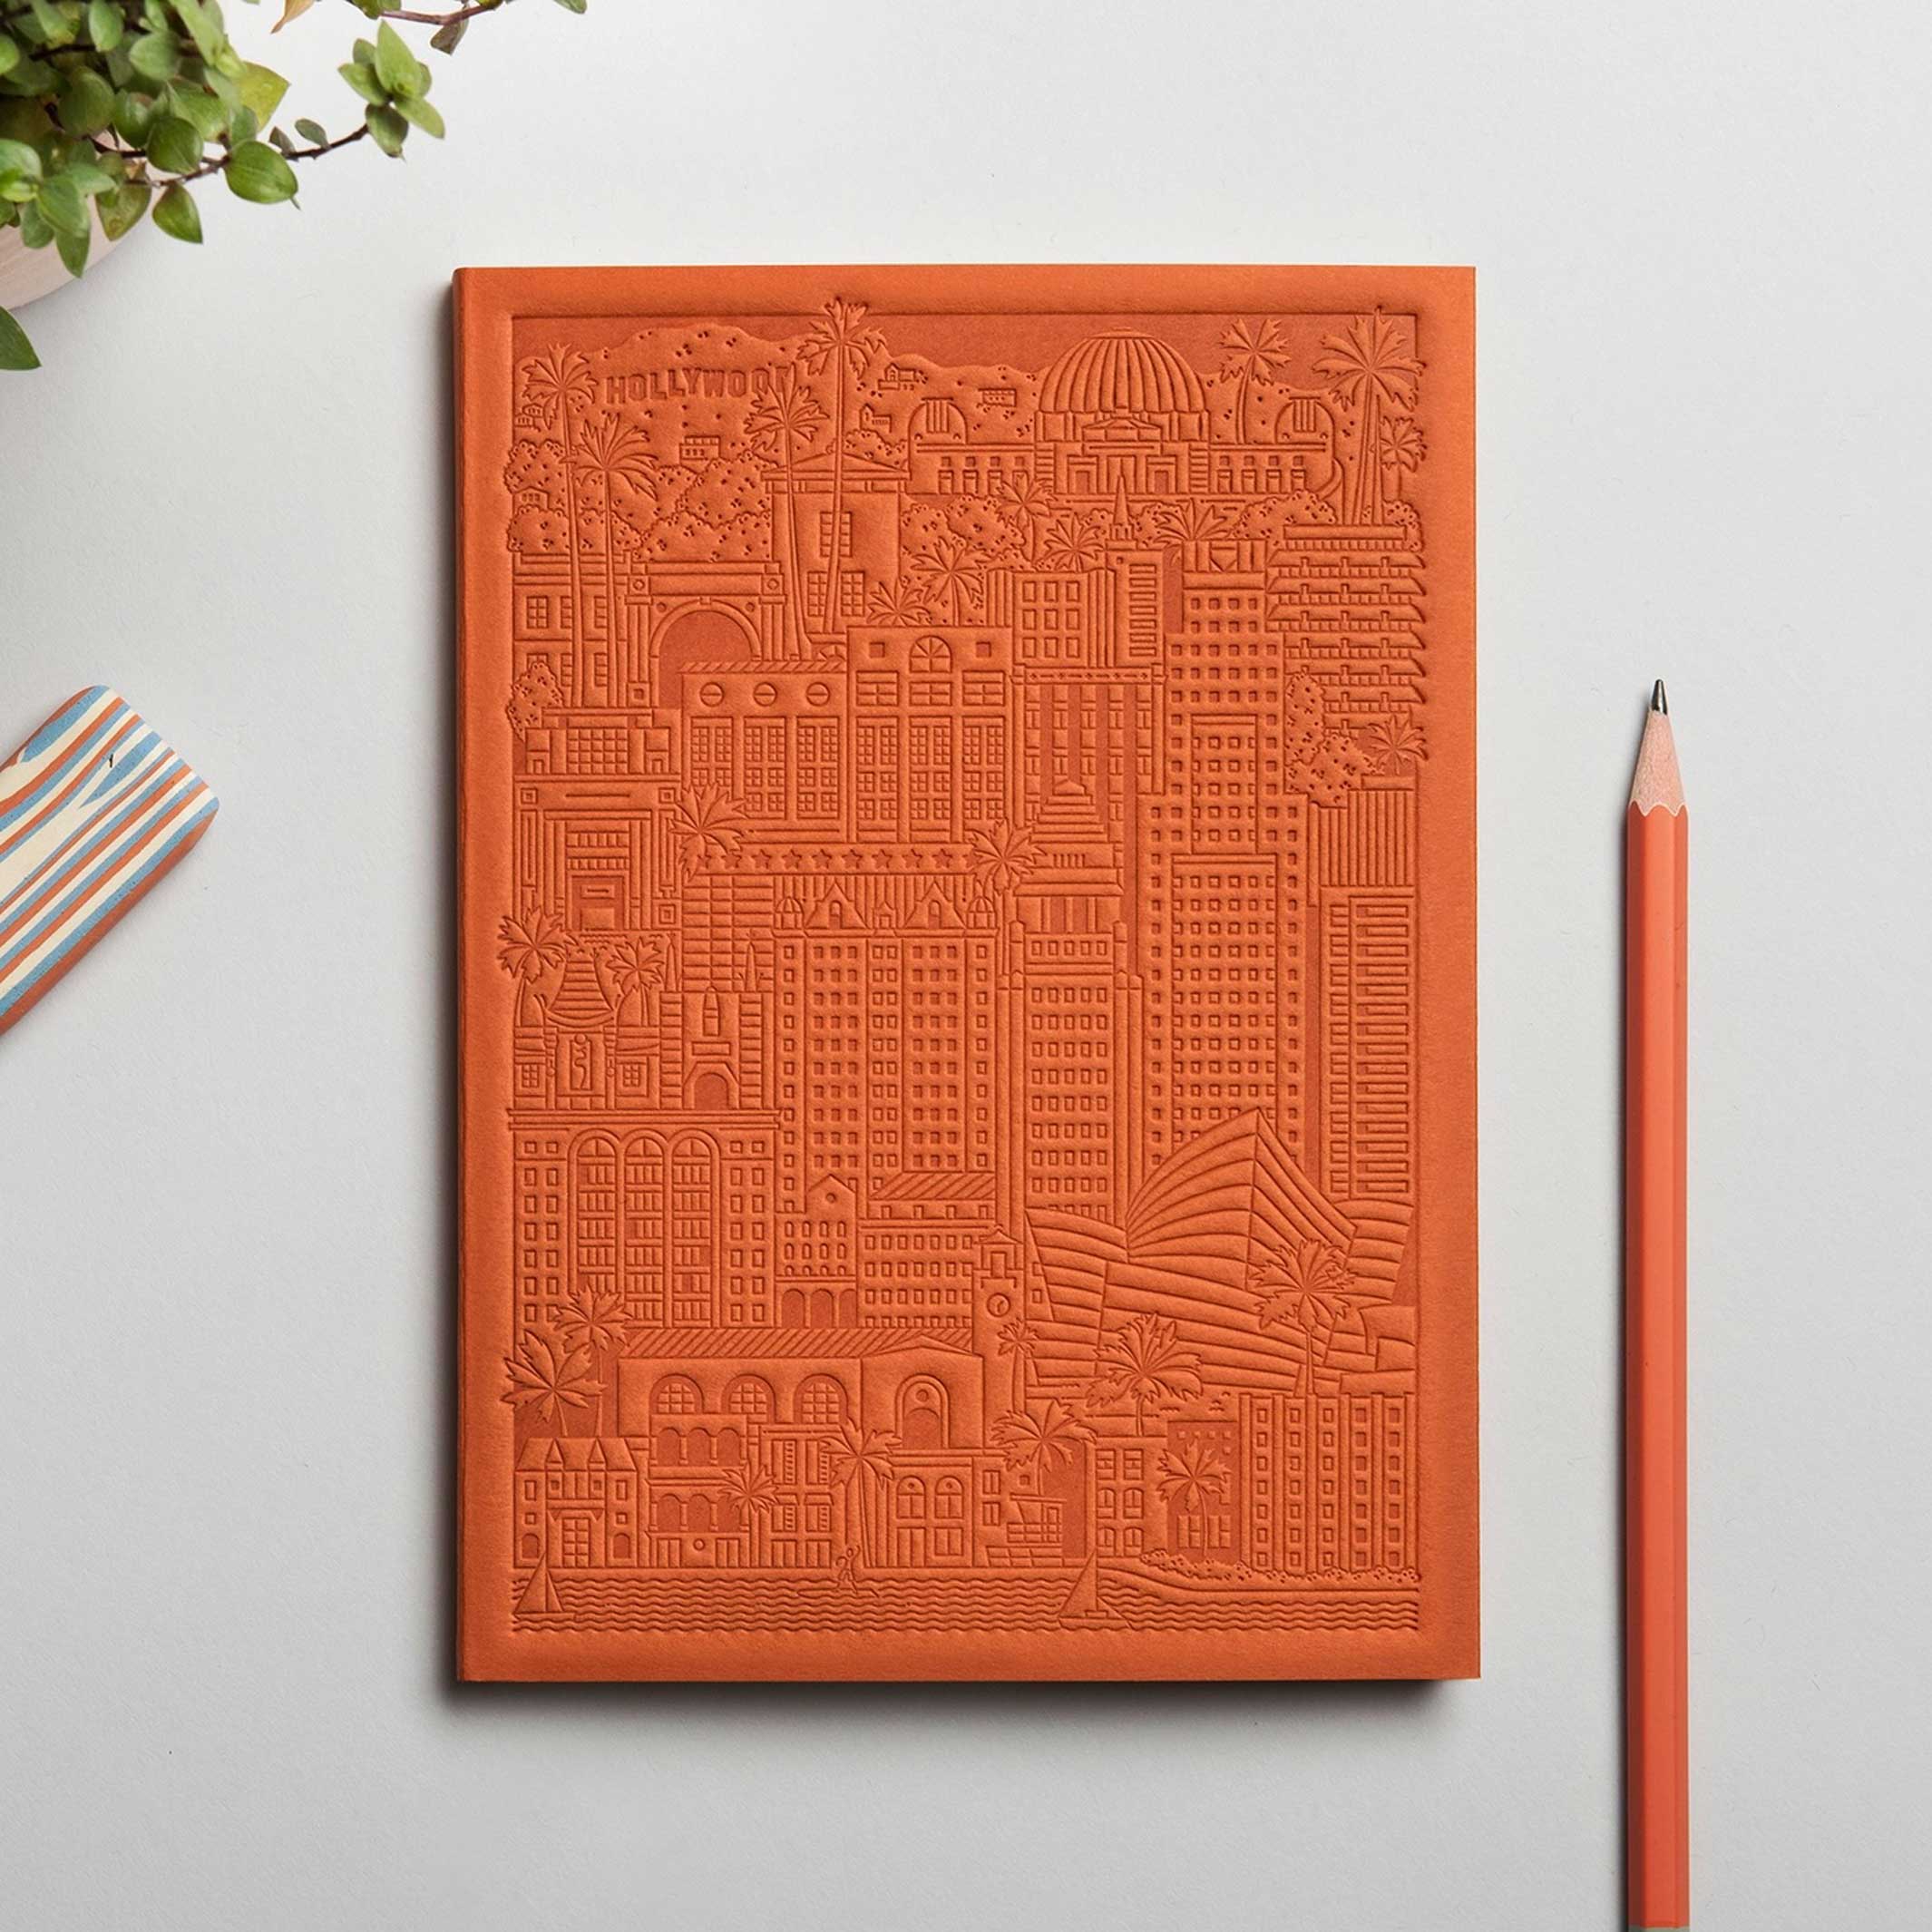 LOS ANGELES NOTEBOOK | 18x13 cm & 128 pages | the city works